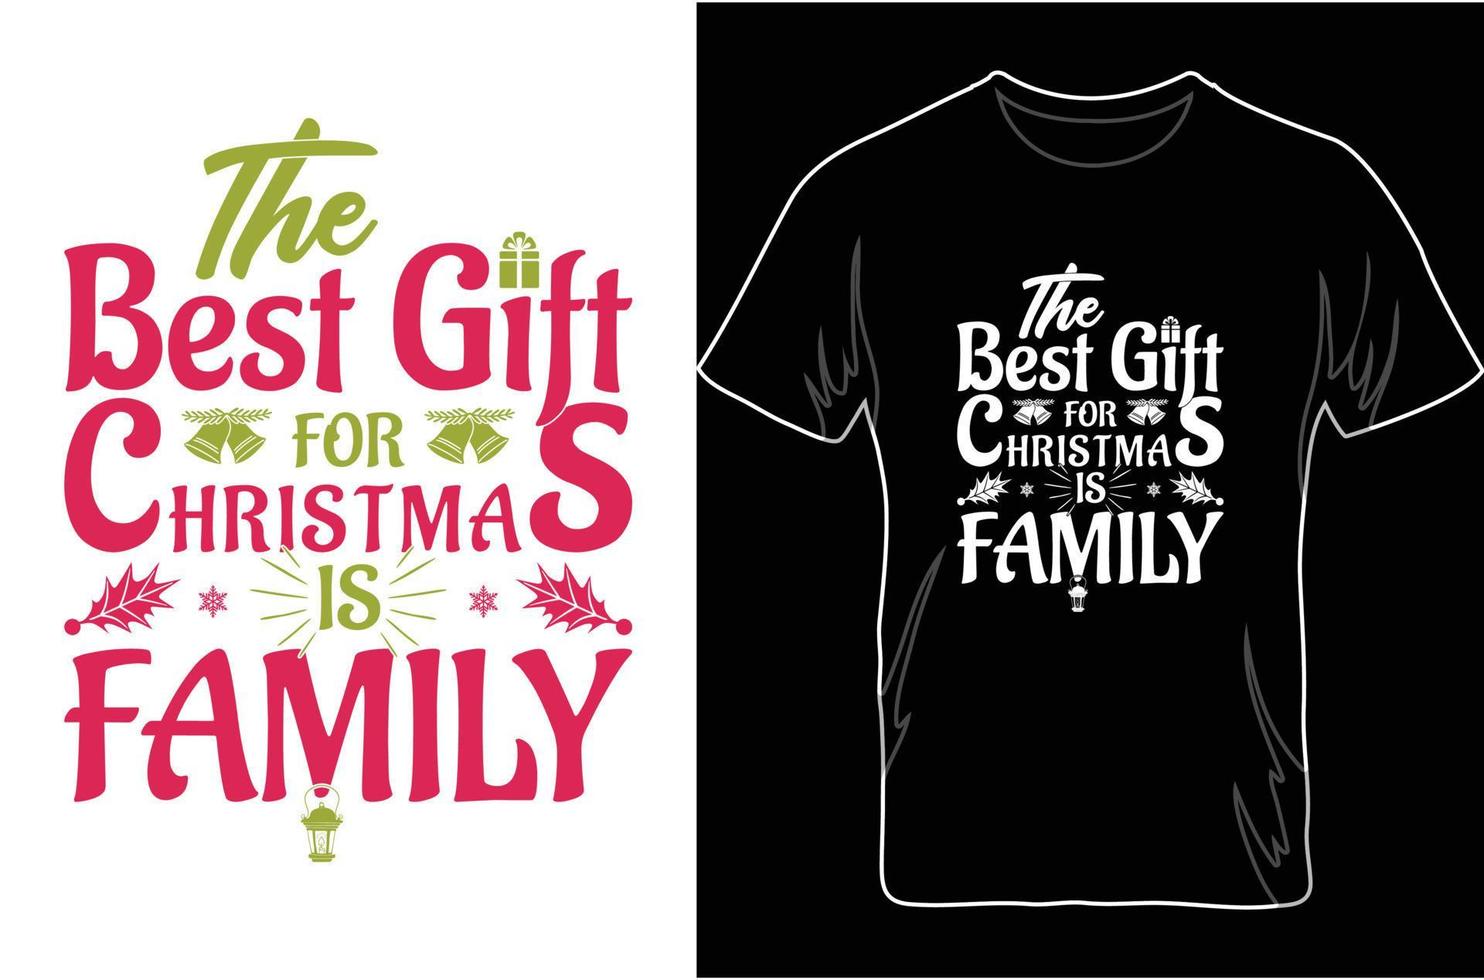 https://static.vecteezy.com/system/resources/previews/013/895/586/non_2x/the-best-gift-for-christmas-is-family-christmas-gifts-for-family-vector.jpg